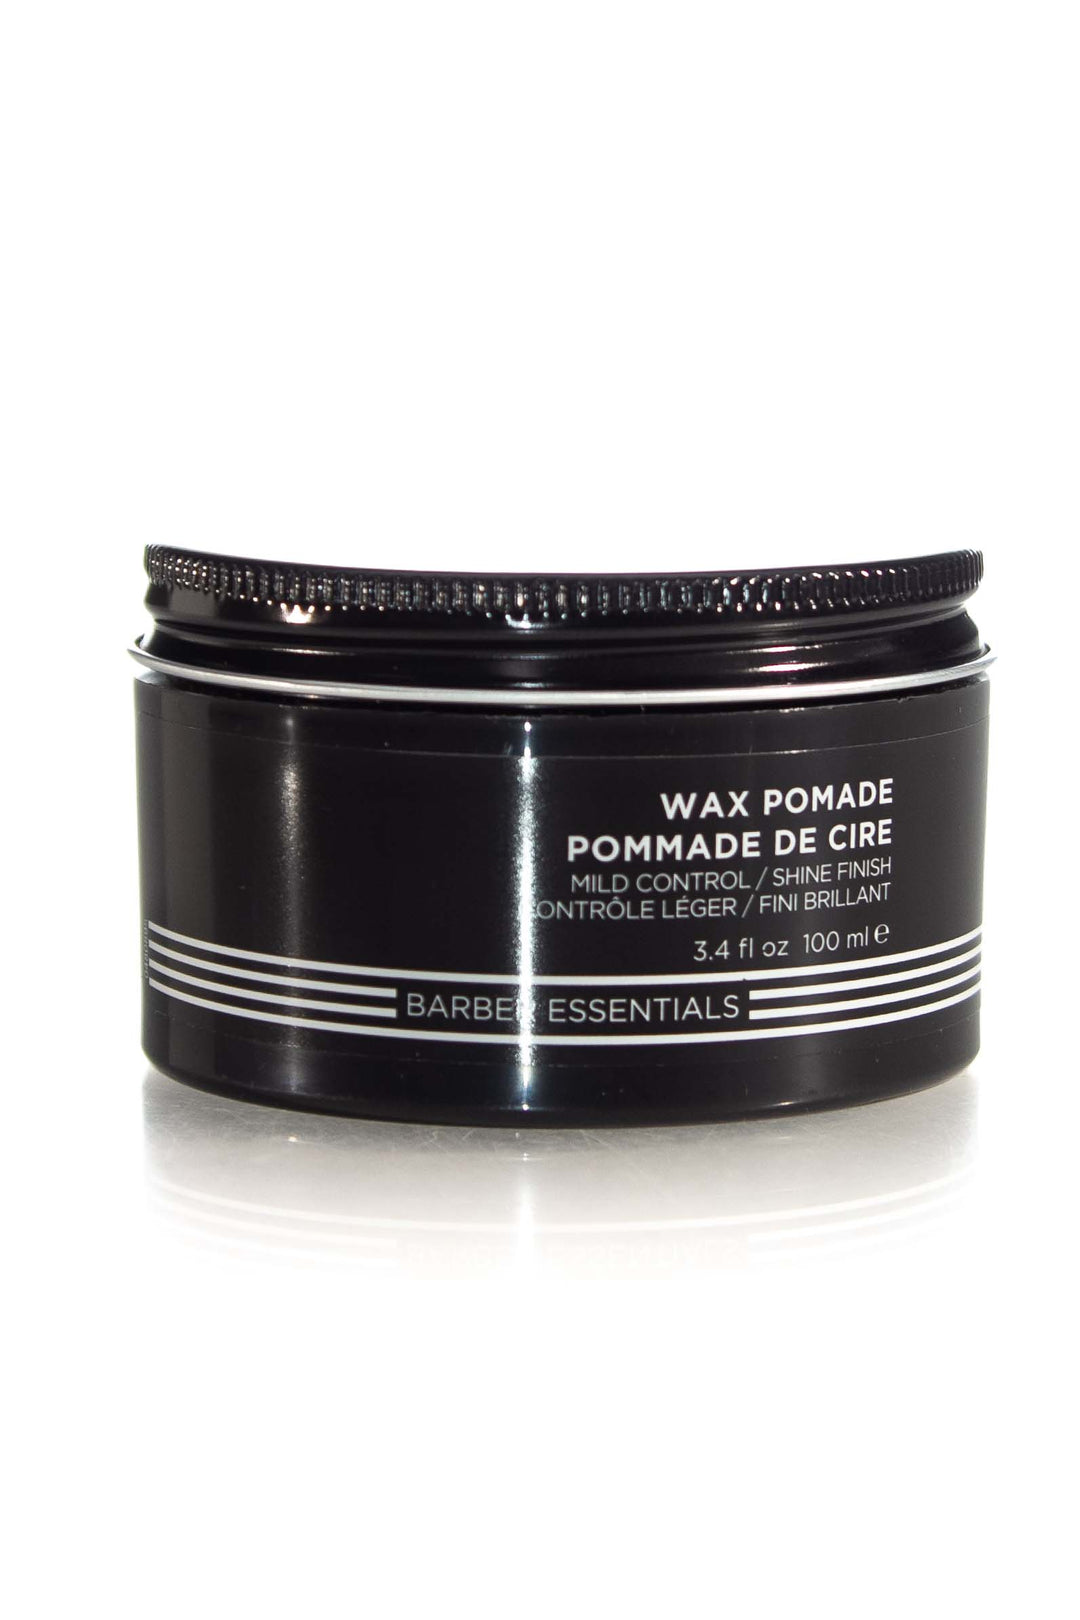 Product Image: Redken Brews Wax Pomade - 100ml